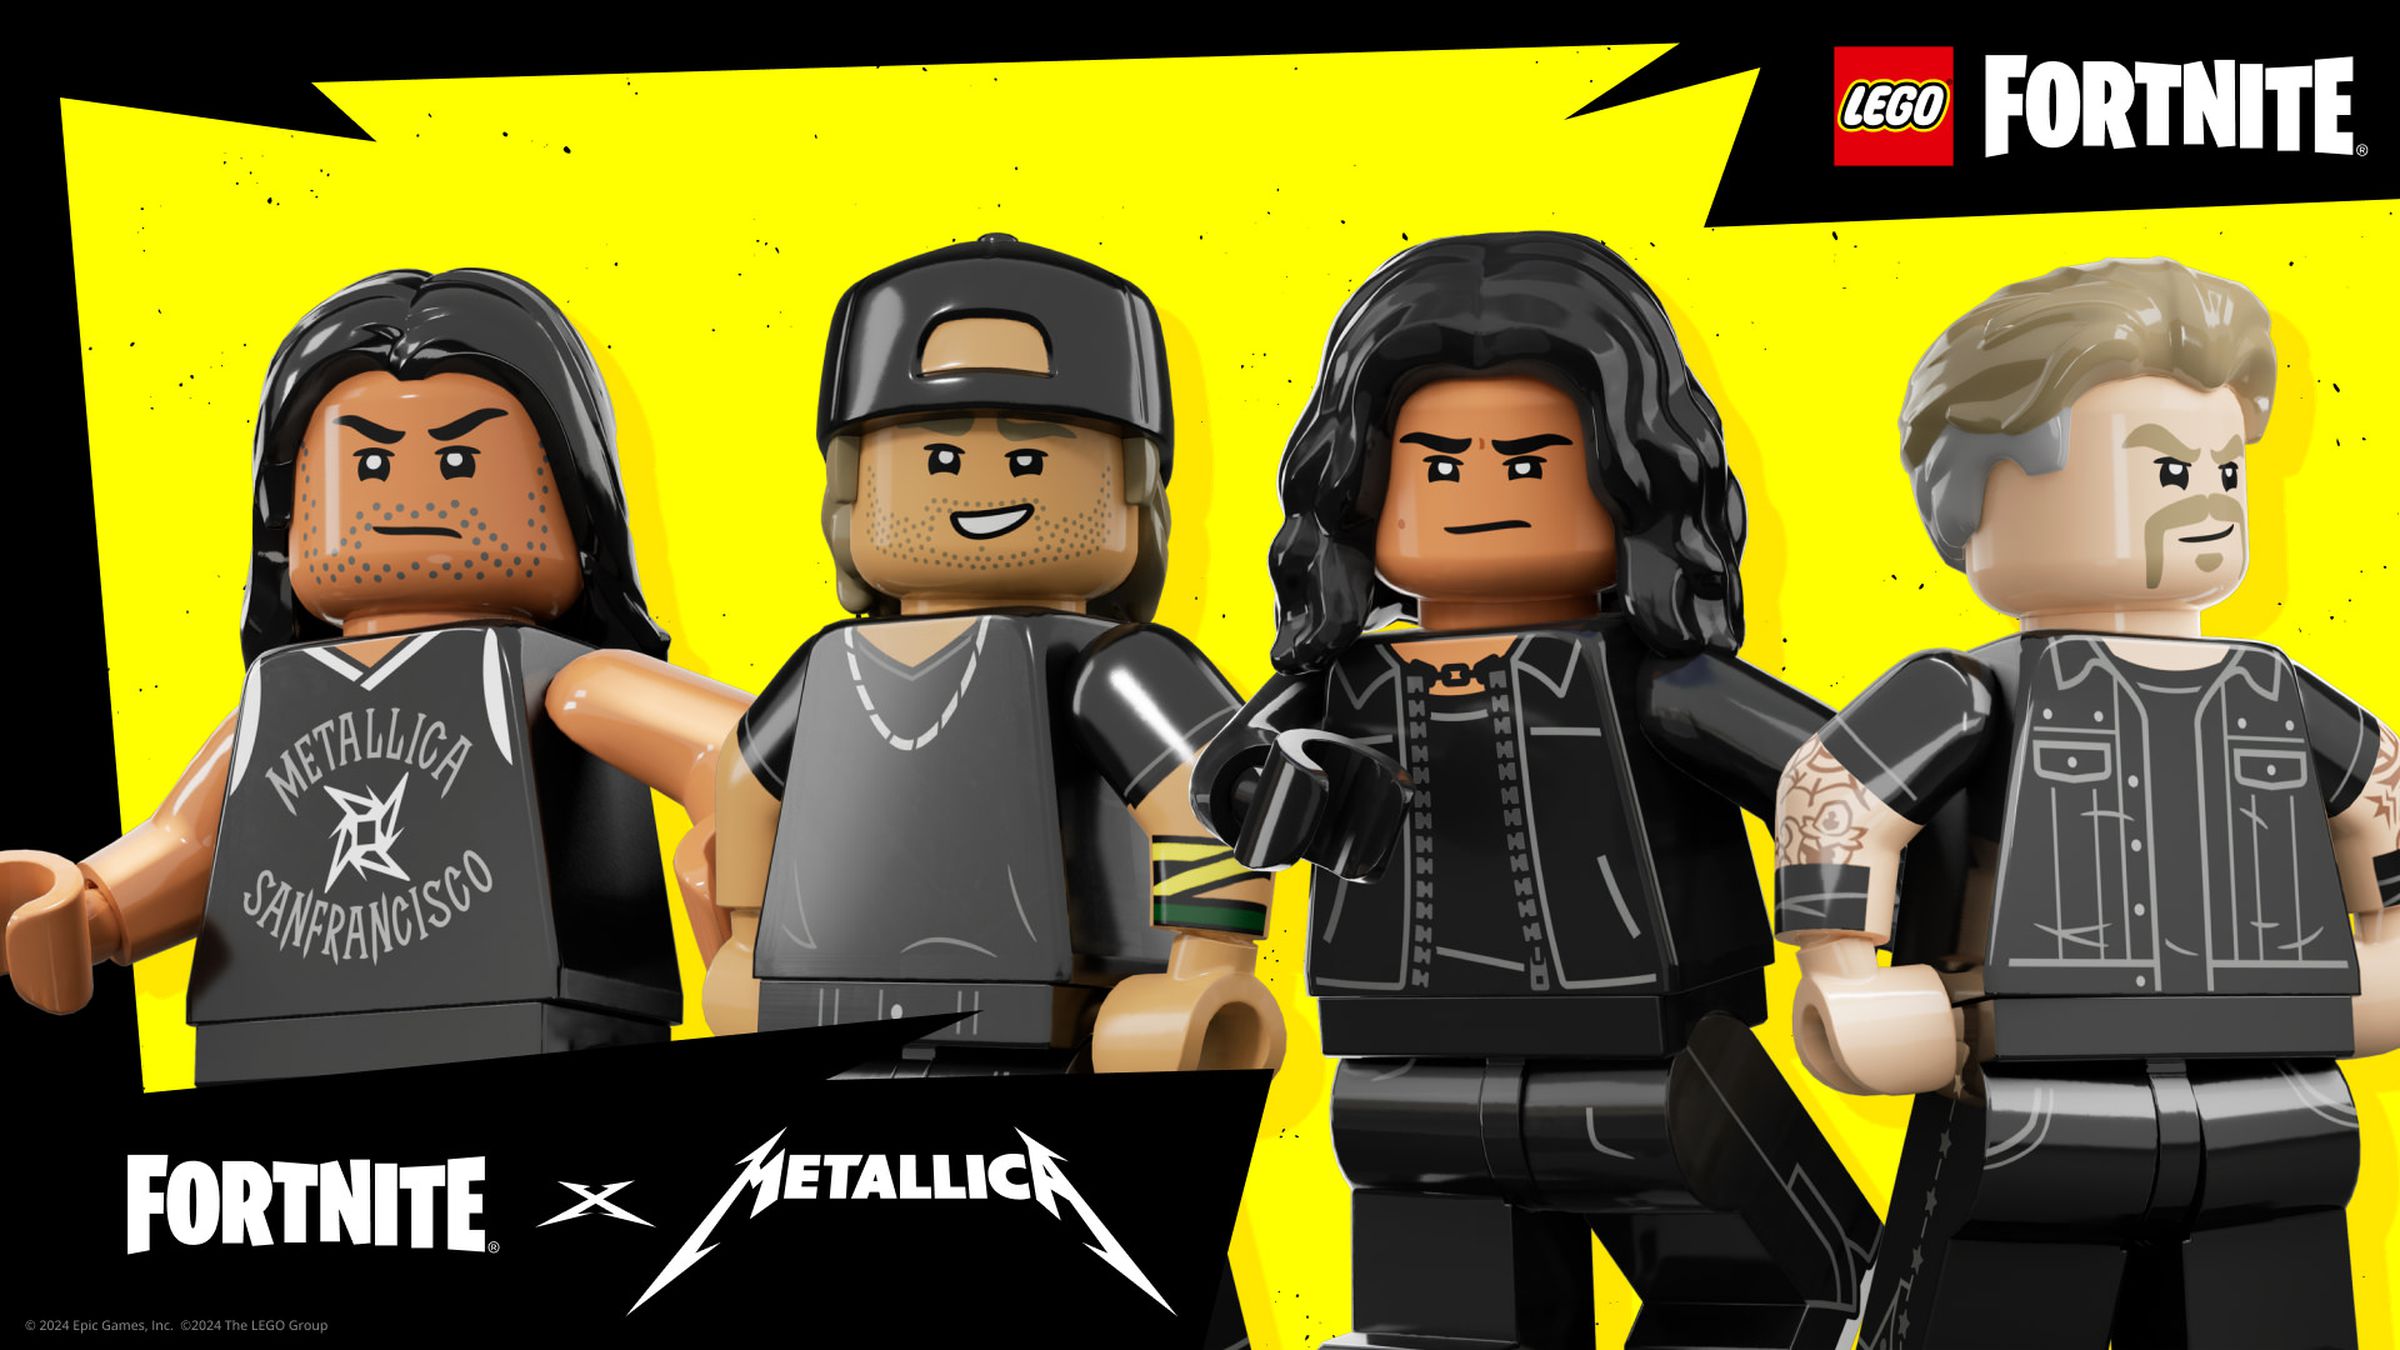 The band Metallica in Lego Form.